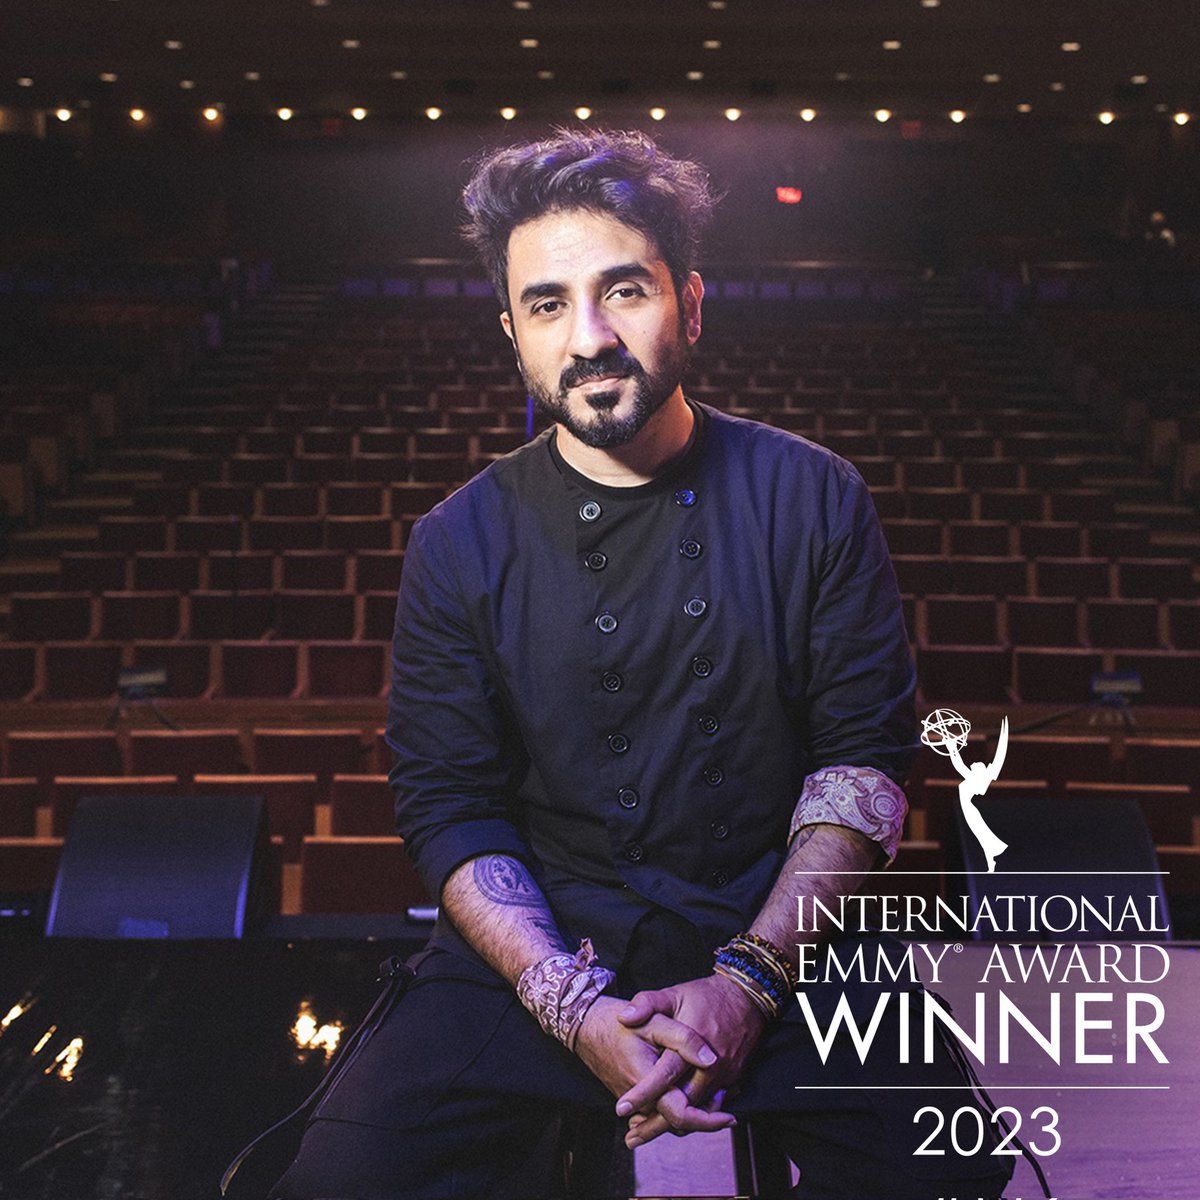 Here's #VirDas grabbing his first #Emmy!! 🥳🎊

The actor-comedian won in best comedy series category for his stand-up show 'Vir Das: Landing'
Such incredible news... Huge congratulations @thevirdas ✌️😀🙌

#VirDasLanding is streaming on Netflix